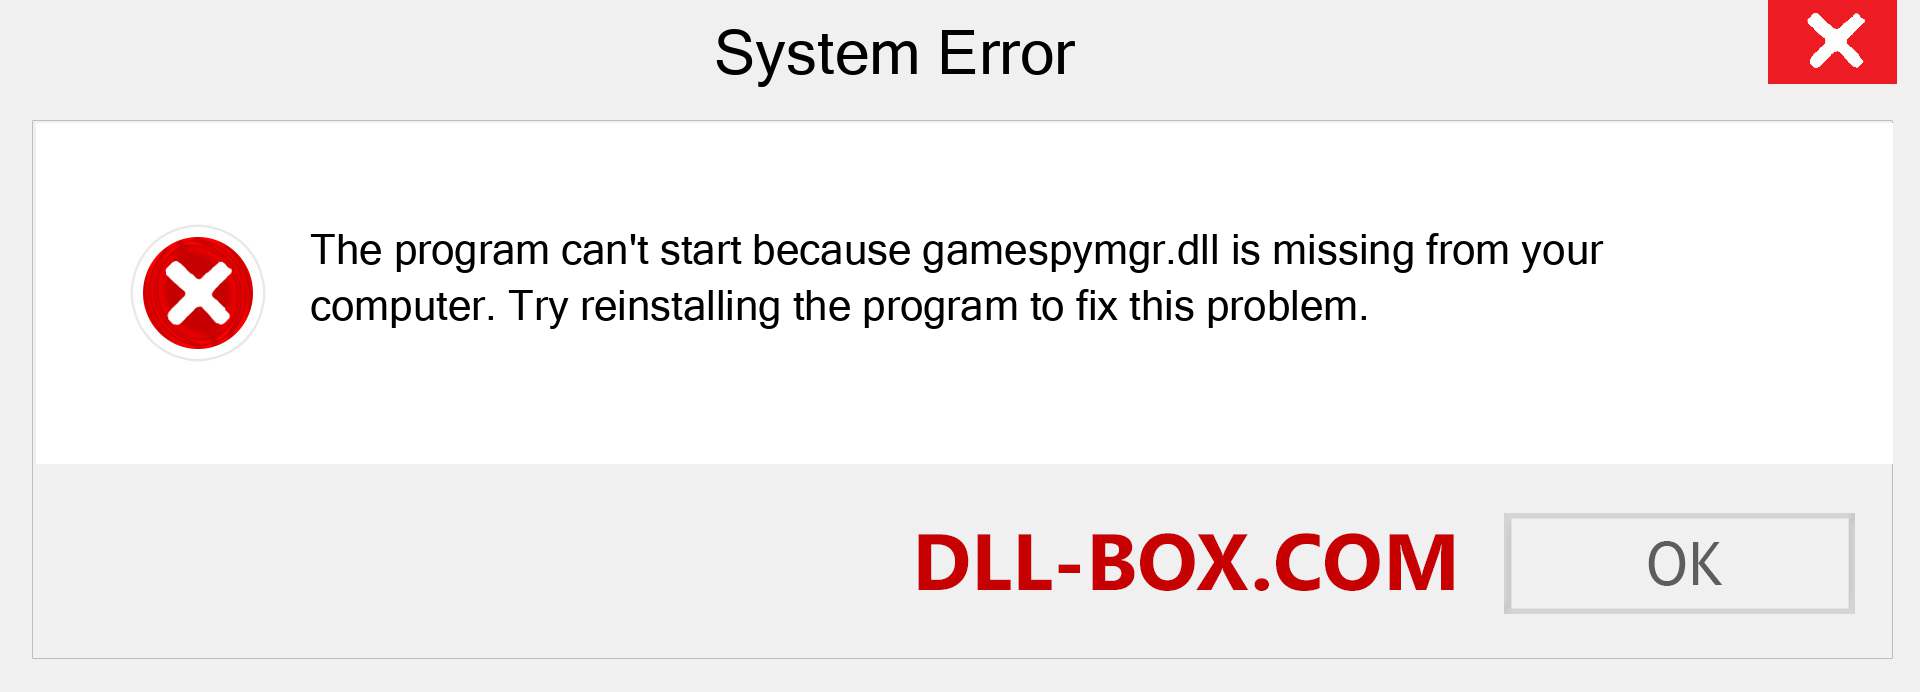  gamespymgr.dll file is missing?. Download for Windows 7, 8, 10 - Fix  gamespymgr dll Missing Error on Windows, photos, images